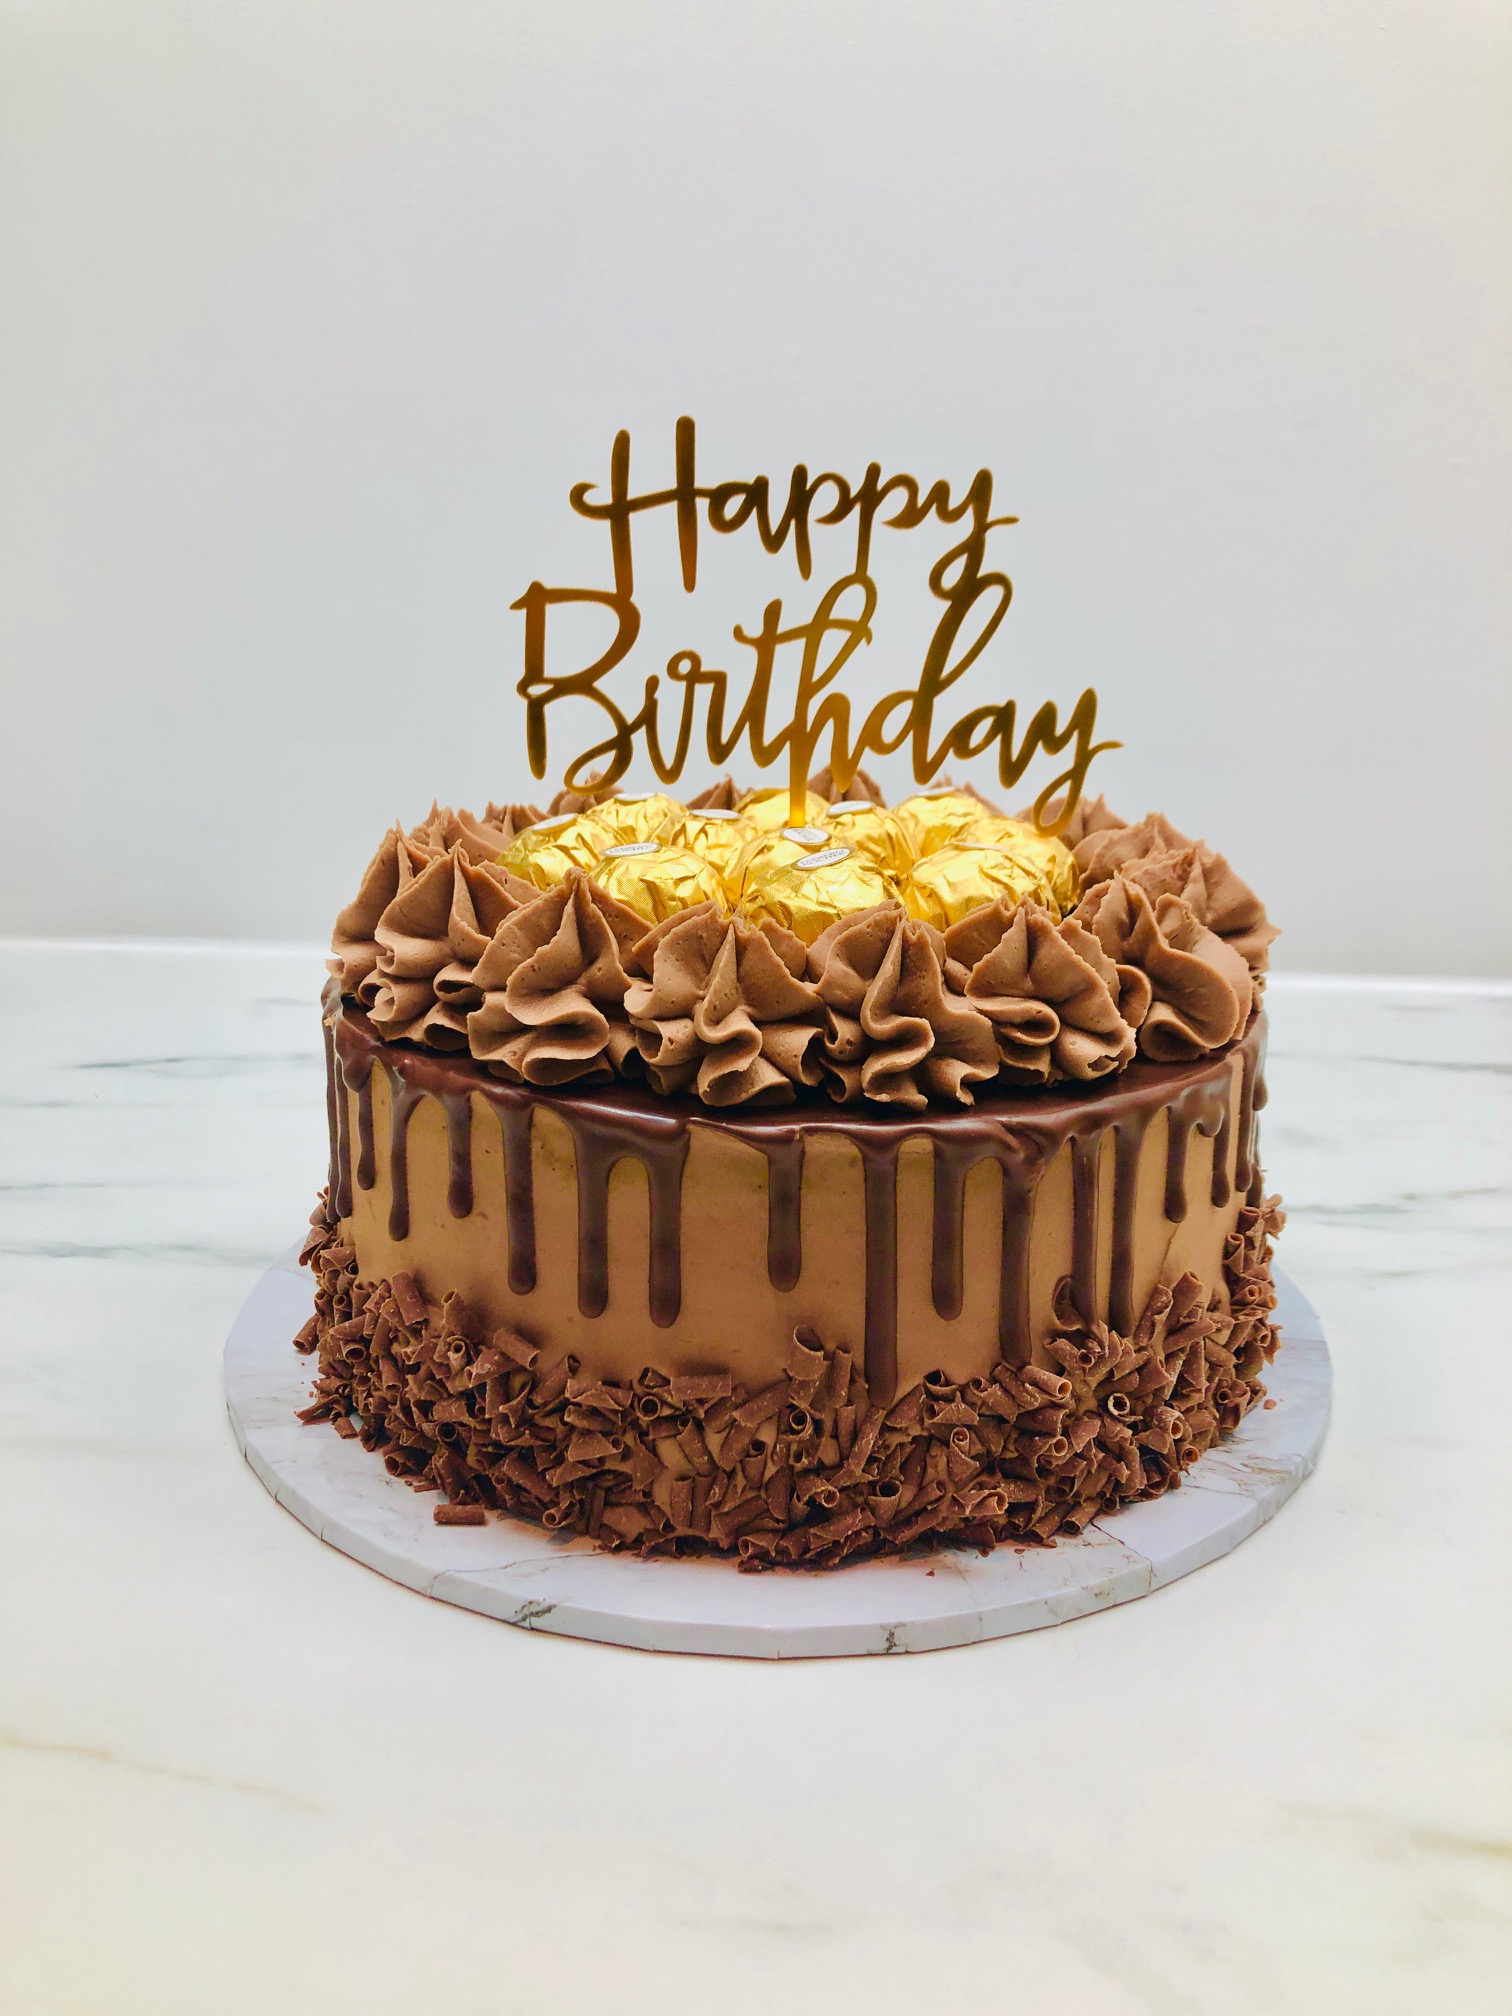 Cakes Online - Cakes By Anusha